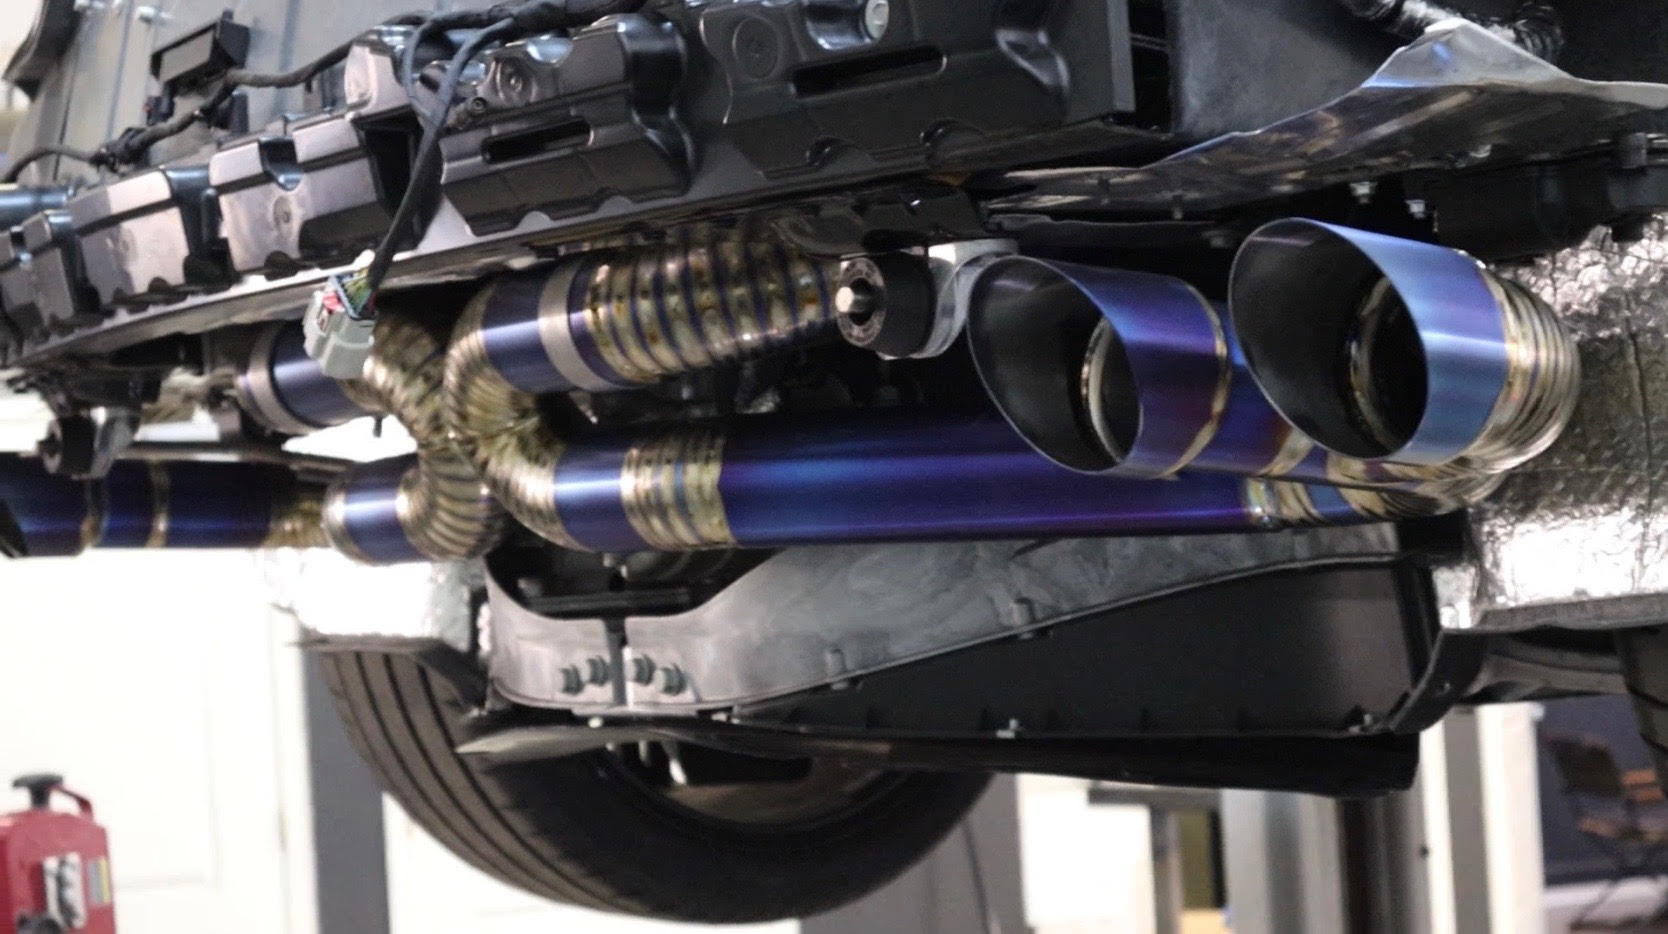 Newly Released C8 Titanium Exhaust! Looks and sounds amazing